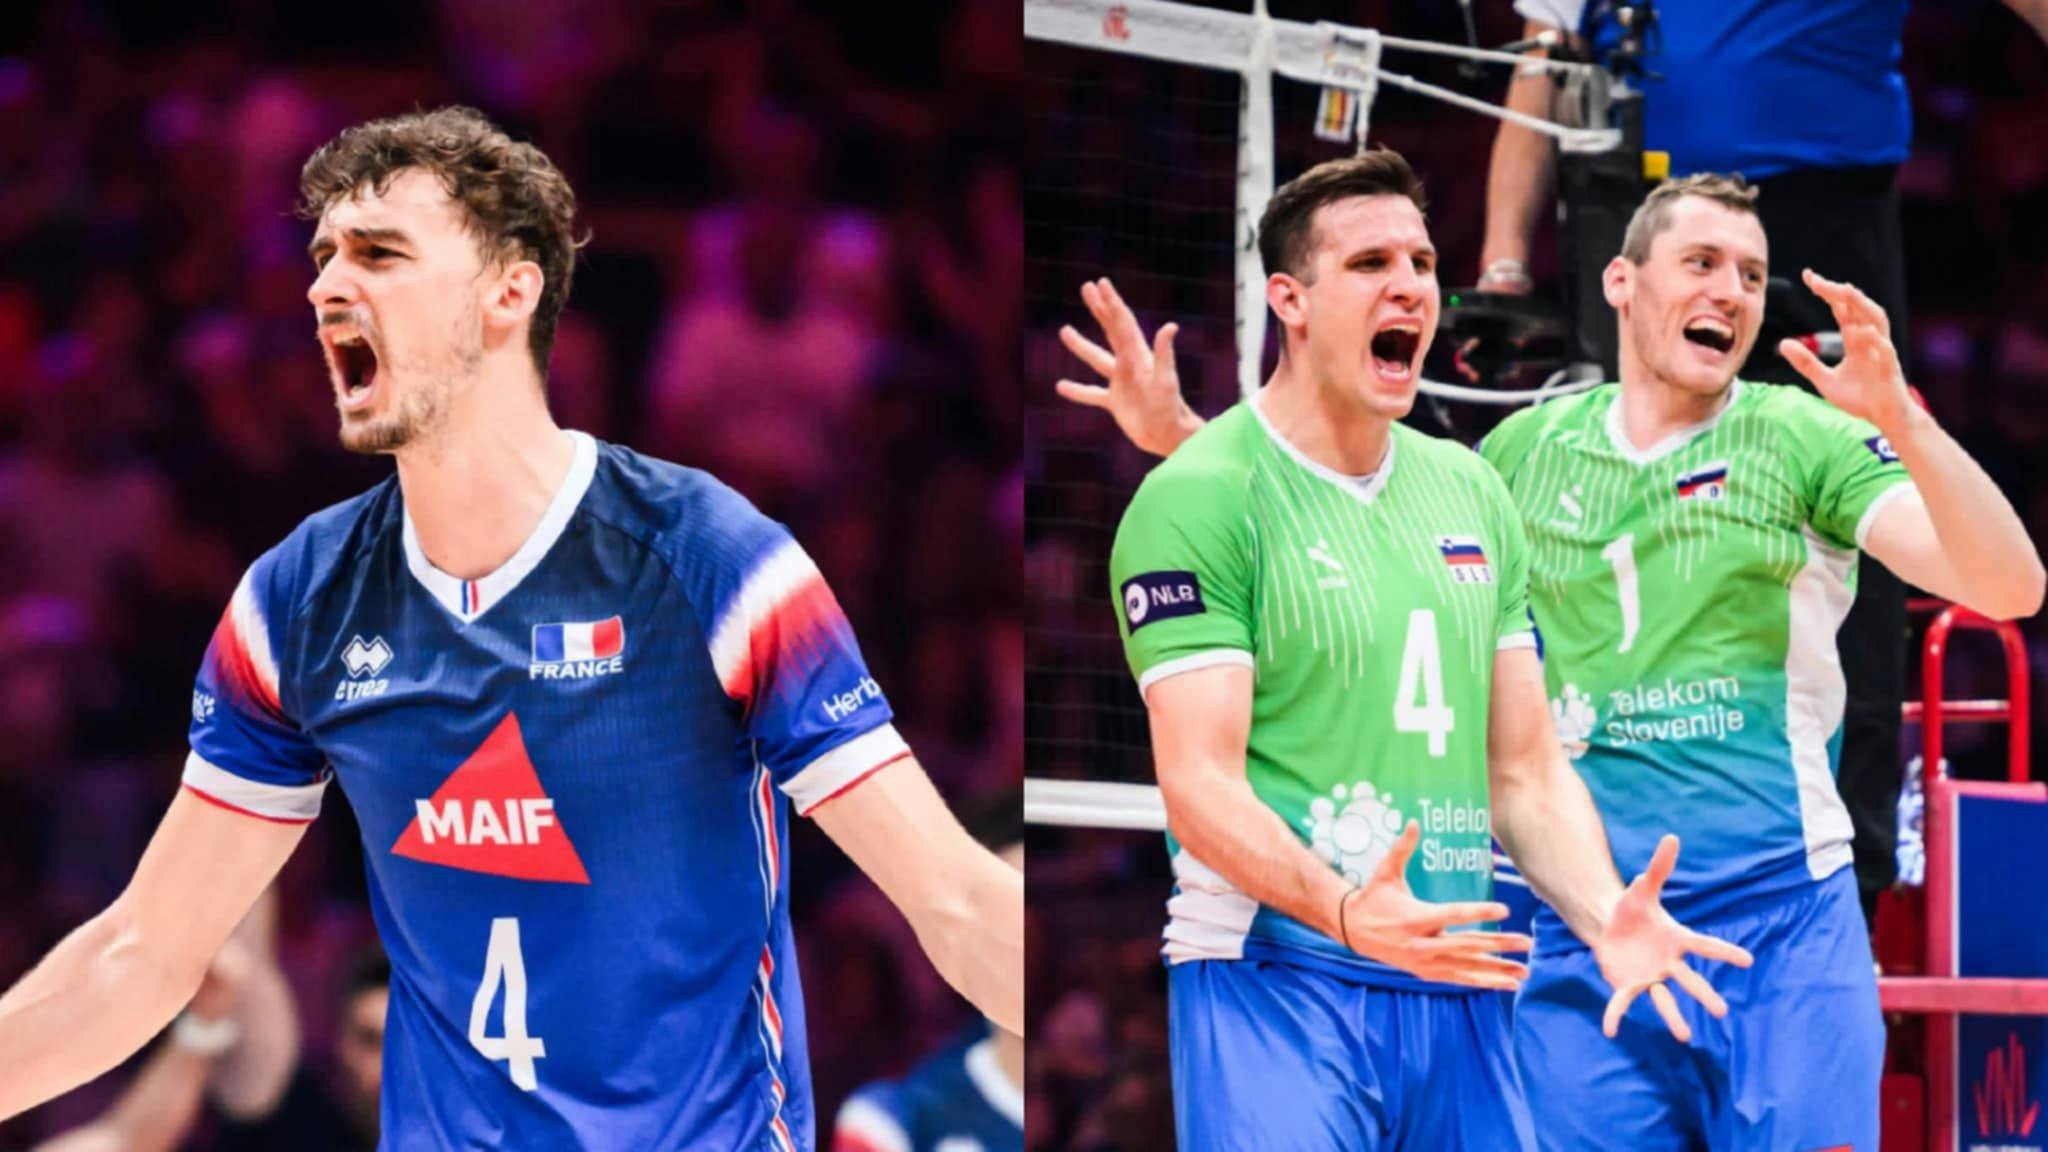 VNL: France, Slovenia complete semis cast after taking Italy and Argentina out of title contention
